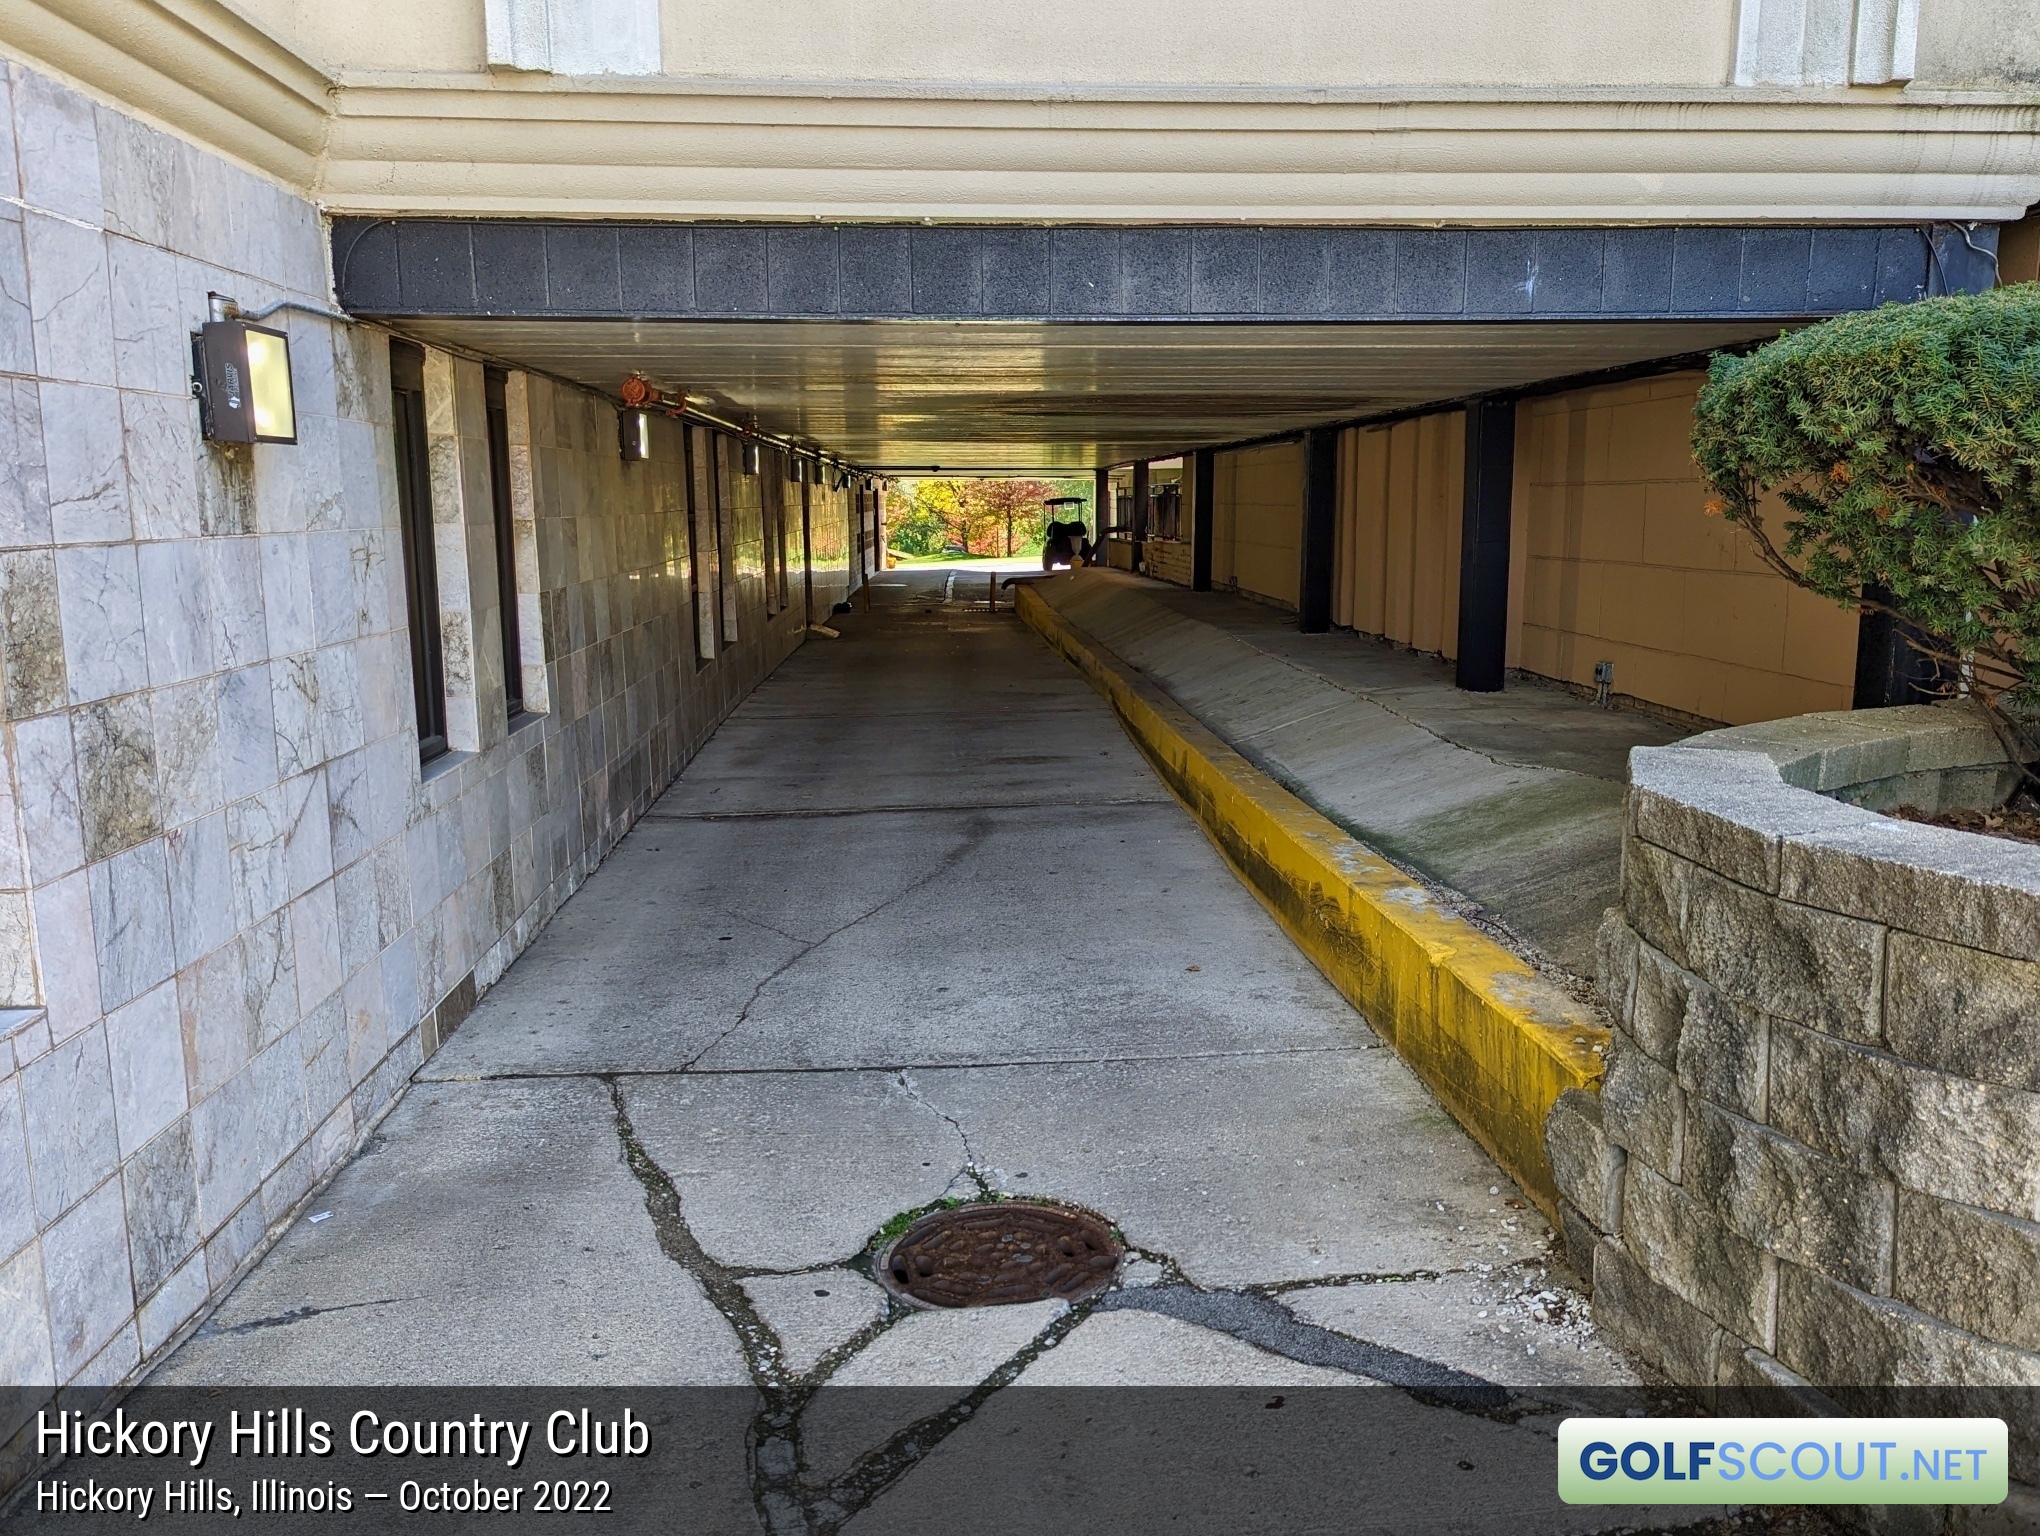 Miscellaneous photo of Hickory Hills Country Club in Hickory Hills, Illinois. To play golf, you'll go through this tunnel. It's a little dark and spooky, and will psychologically prepare you for the adventure ahead.